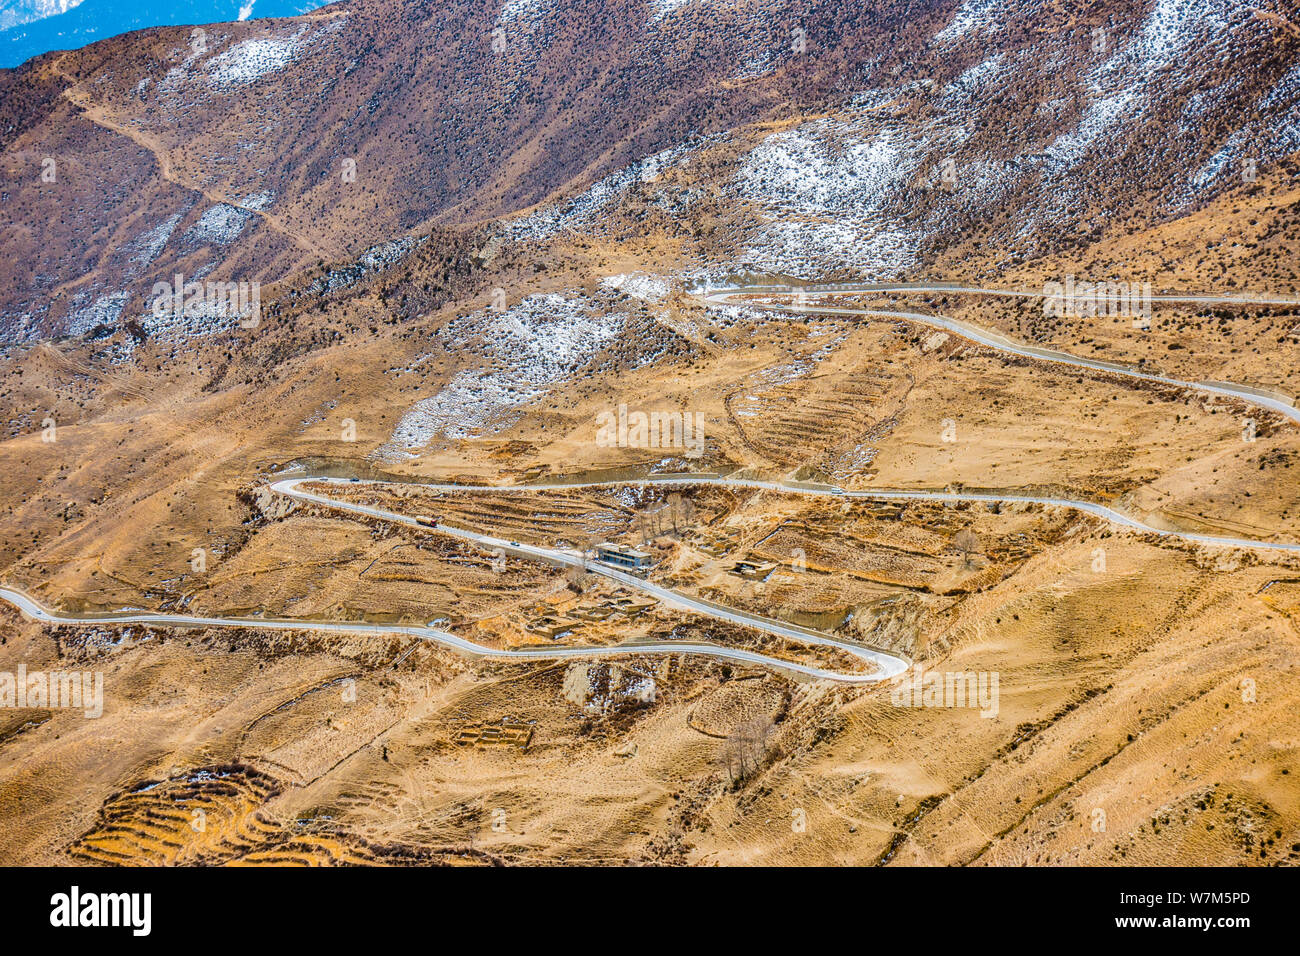 Aerial view of the 'Nujiang 72 Turns', a section of winding road with 72 curves along the Sichuan-Tibet Highway near the Nujiang River in Basu (Baxoi) Stock Photo